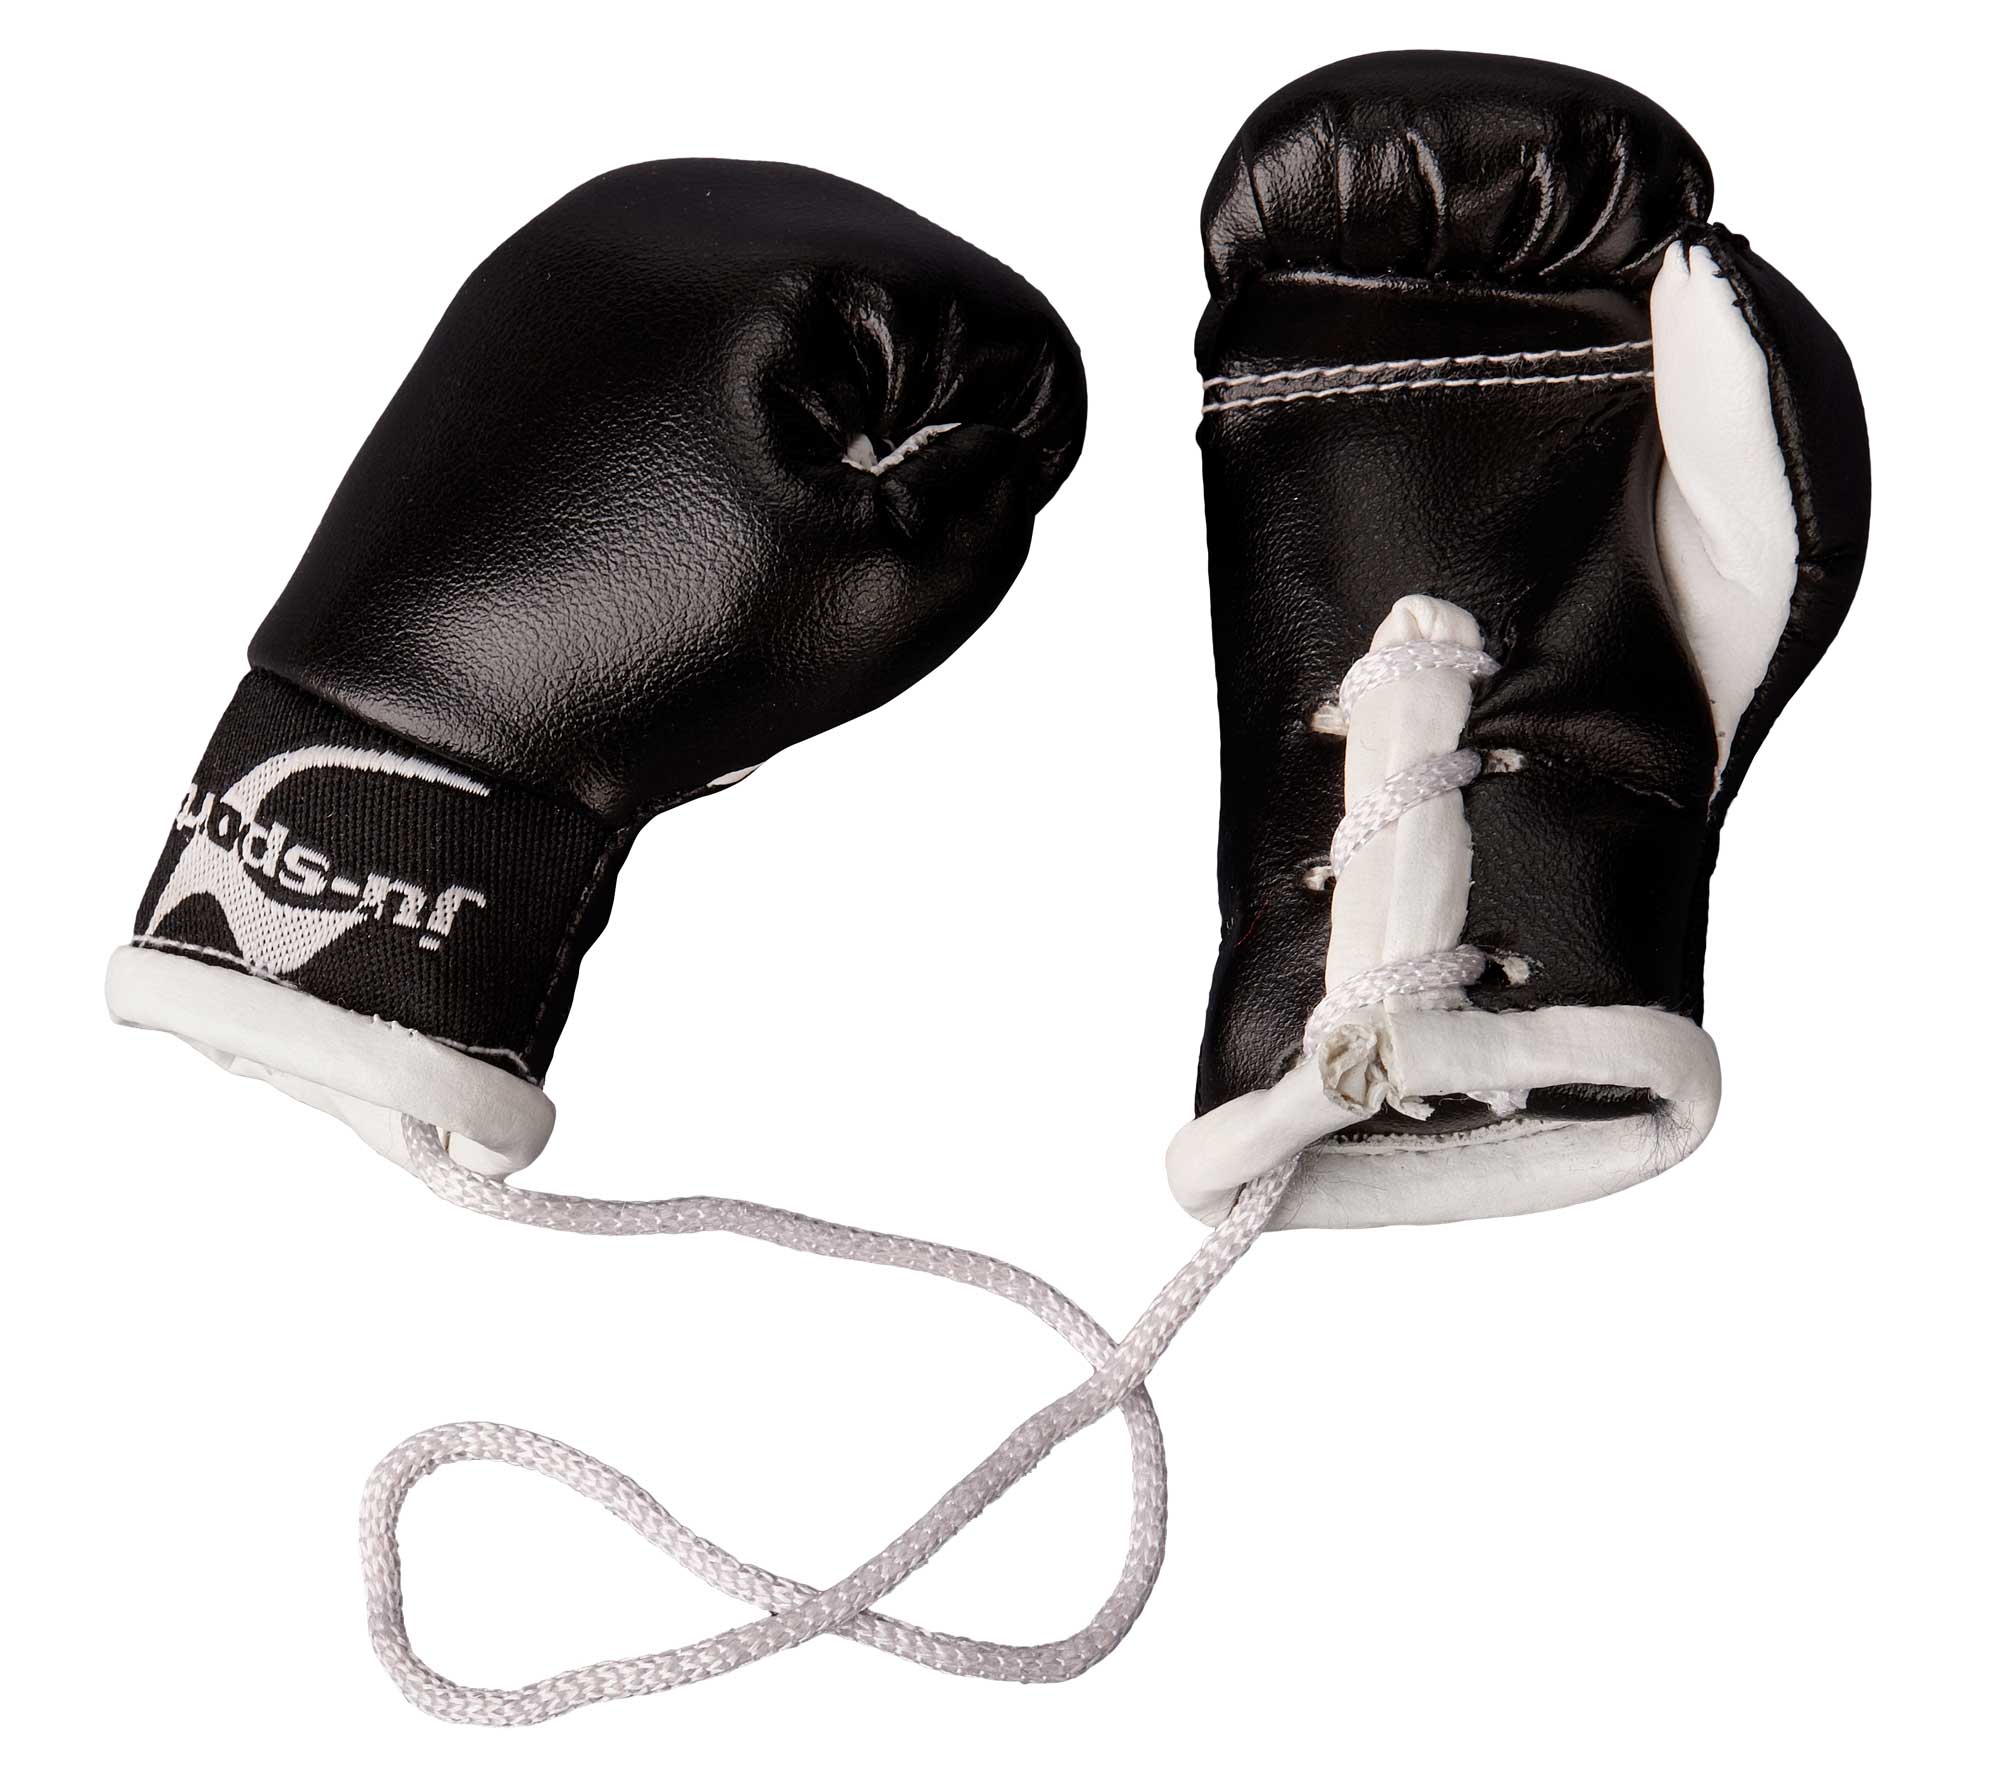 Key Chain Boxing Gloves Leather